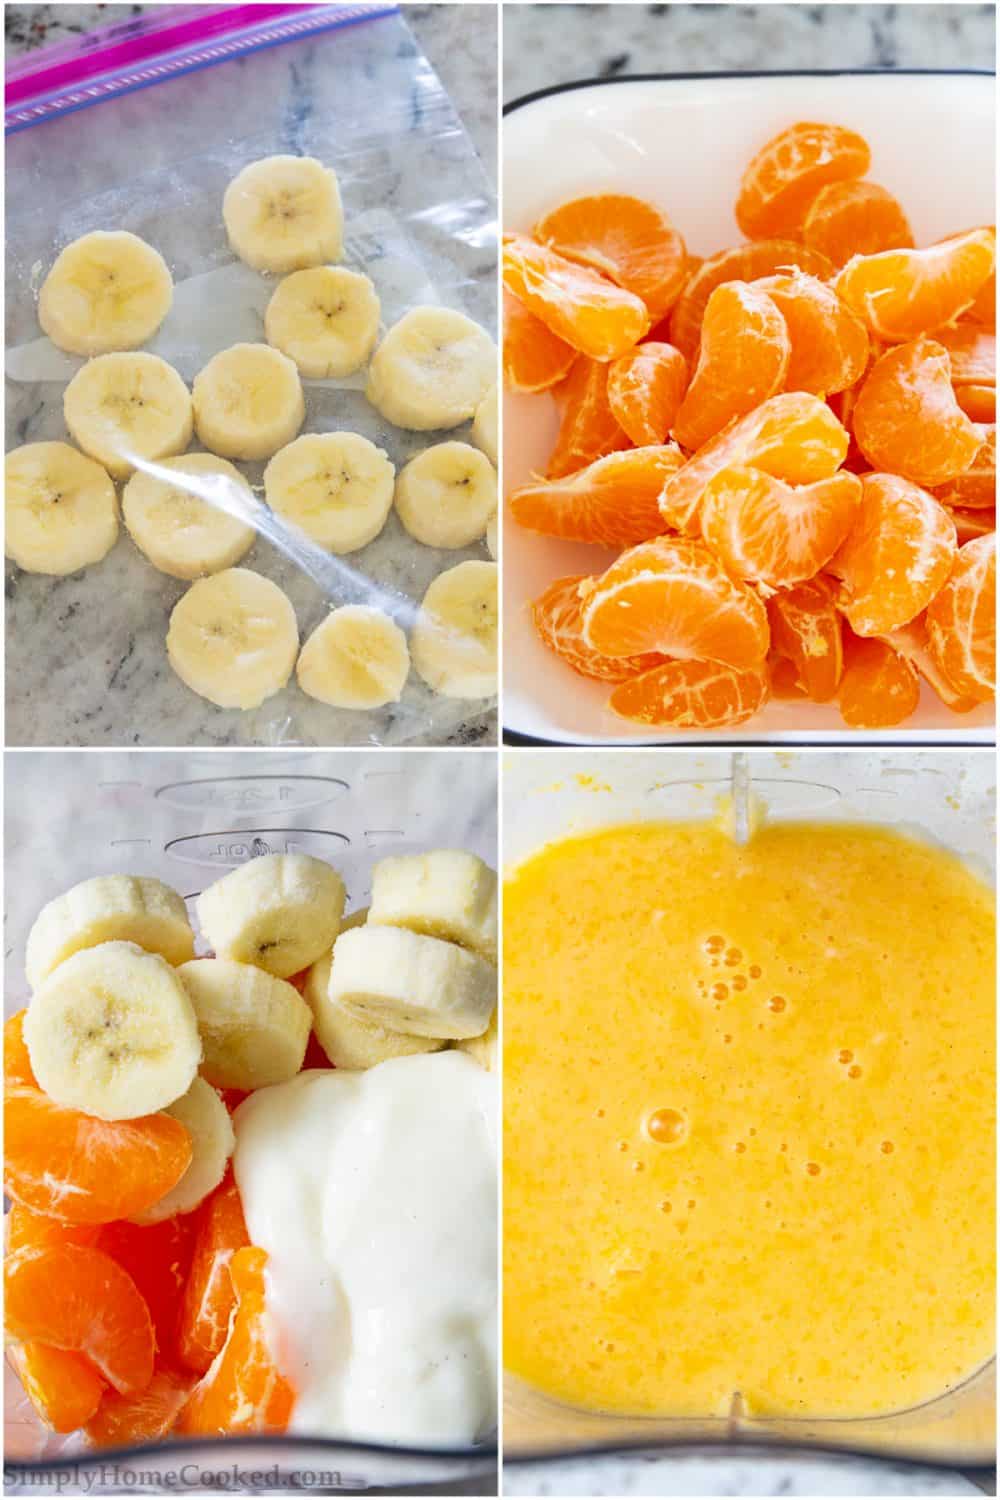 Collage tutorial of preparing bananas and mandarins for the freezer then adding with other ingredients into a blender to create the banana smoothie recipe with mandarins